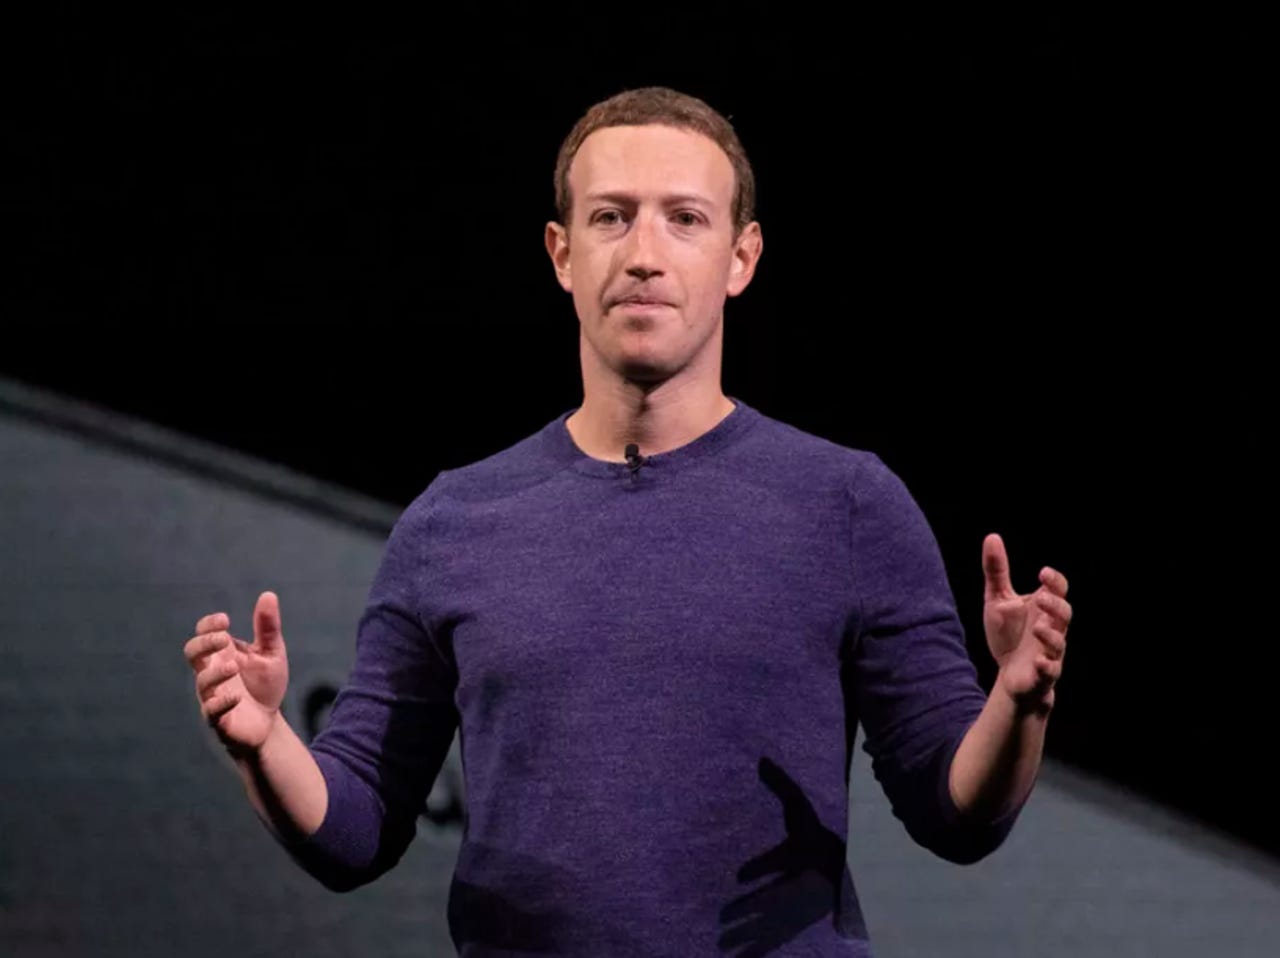 zuckerberg-hands-outstretched.png